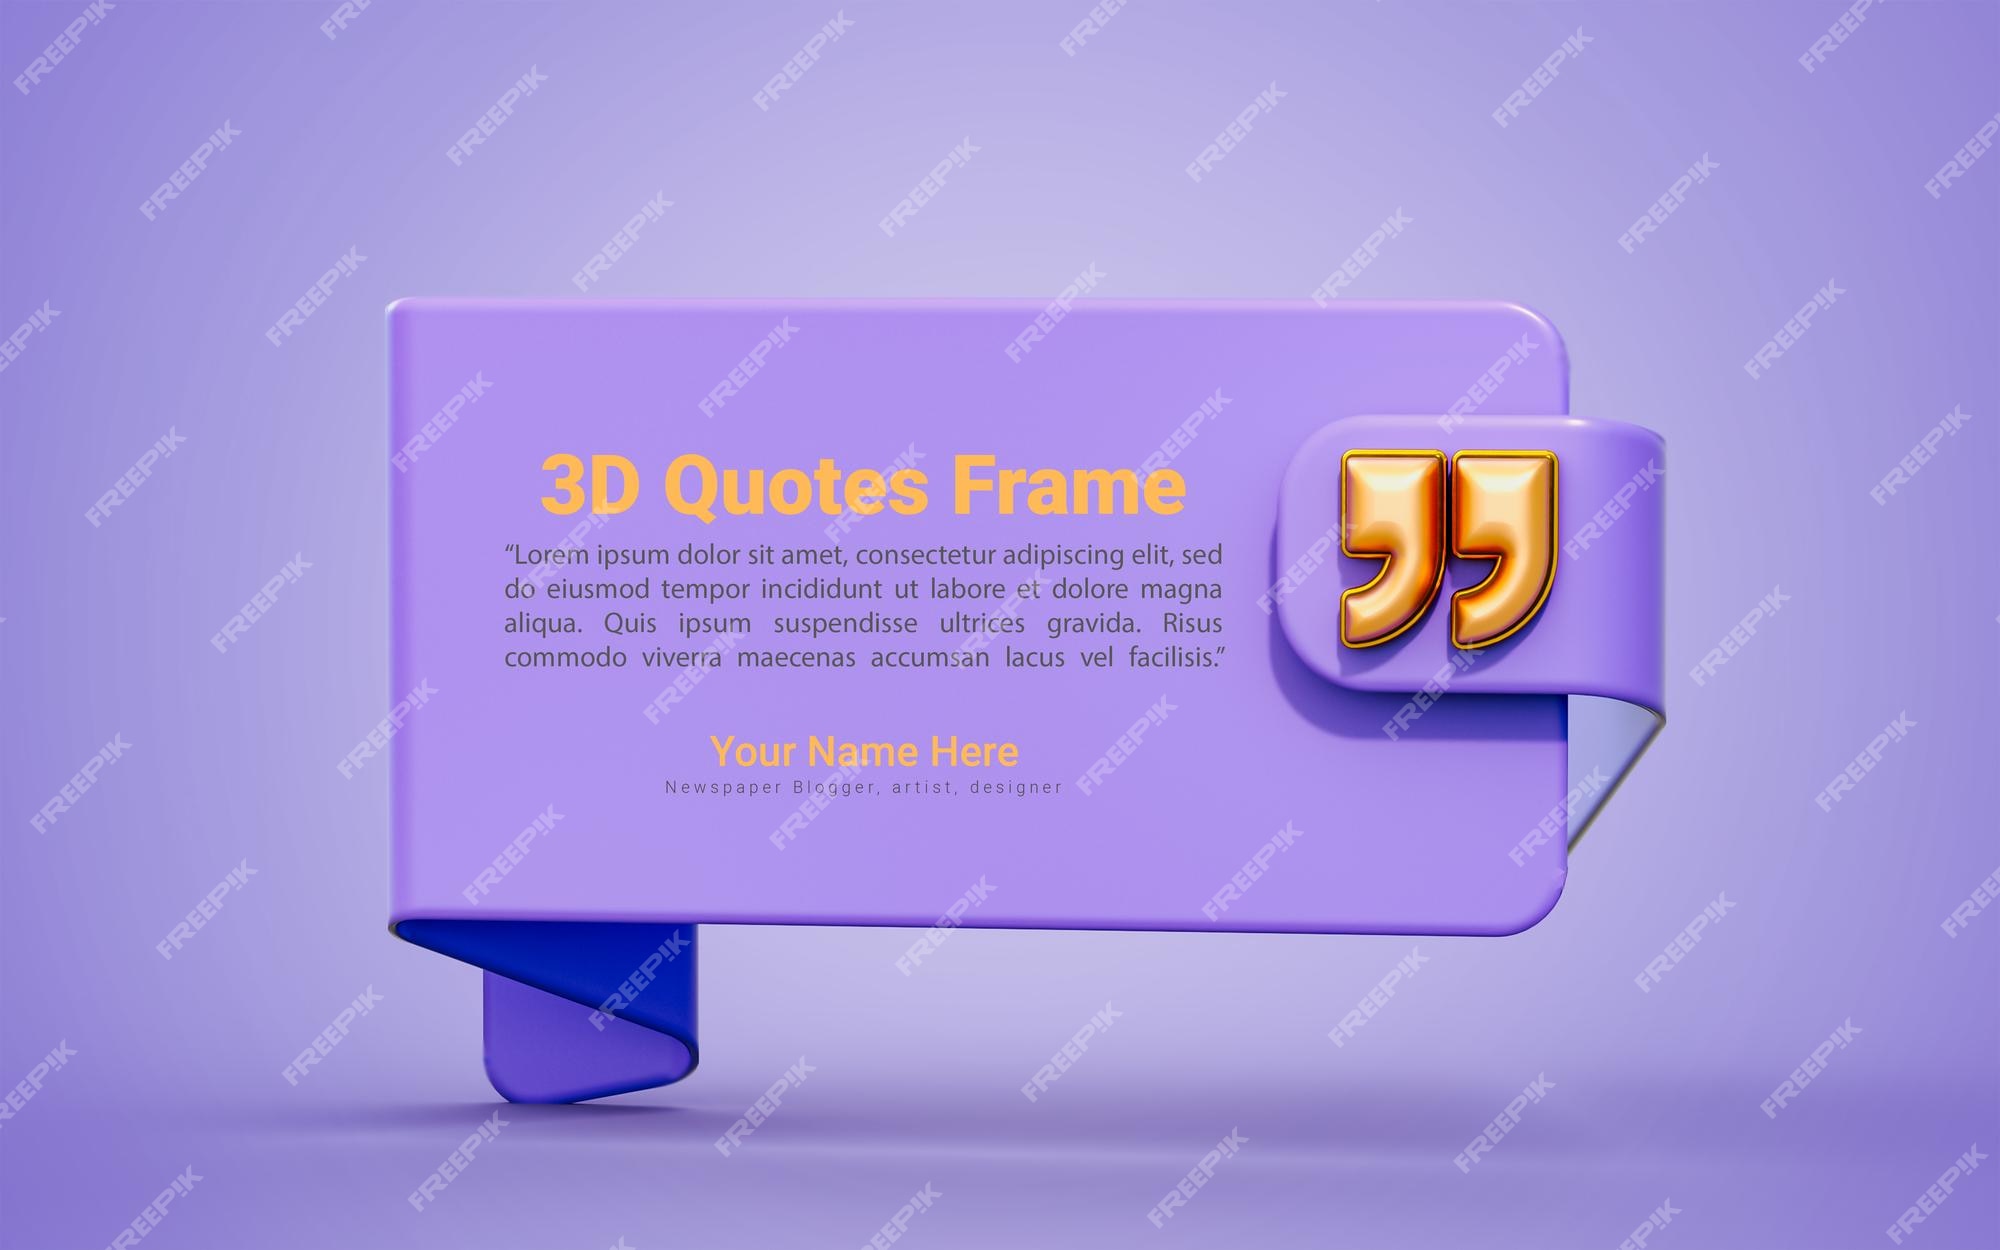 Premium PSD | Quote text box with empty background 3d render concept for  mark mention template frame